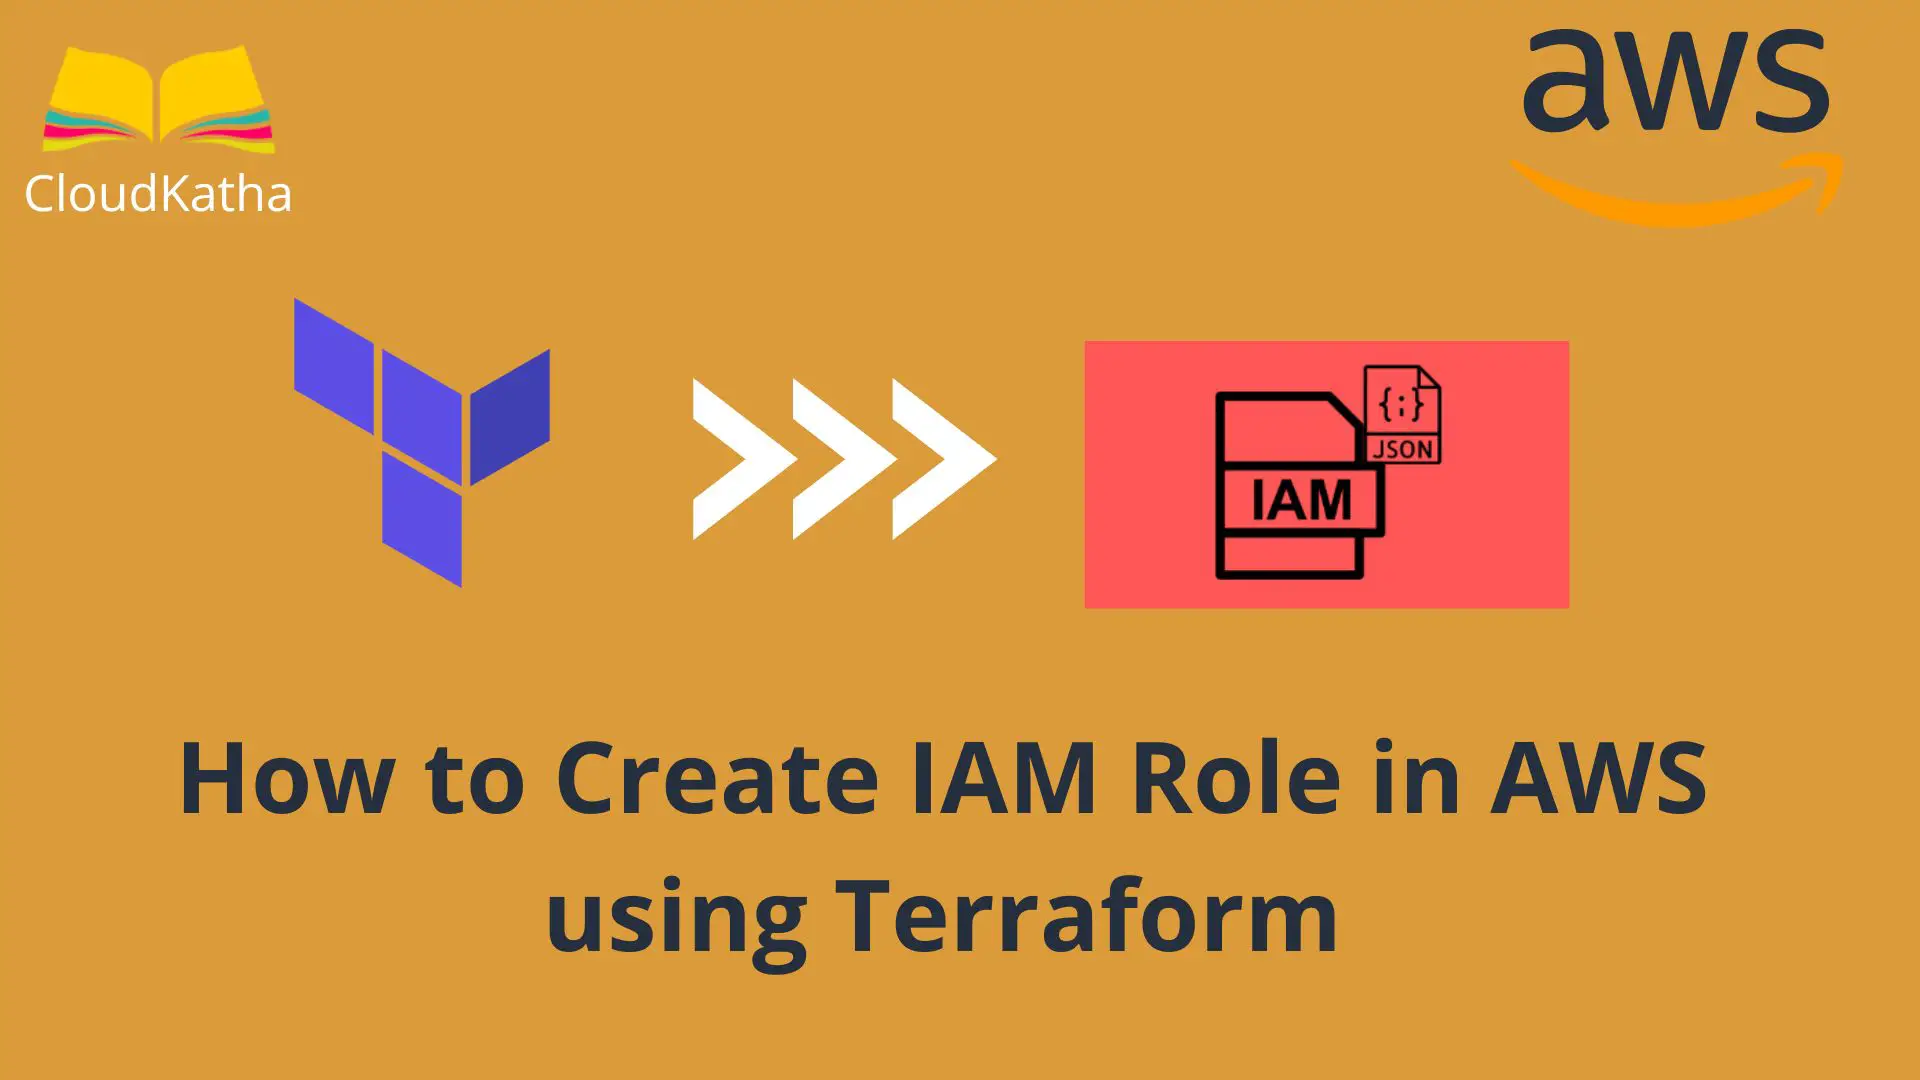 How to Create IAM Role in AWS using Terraform